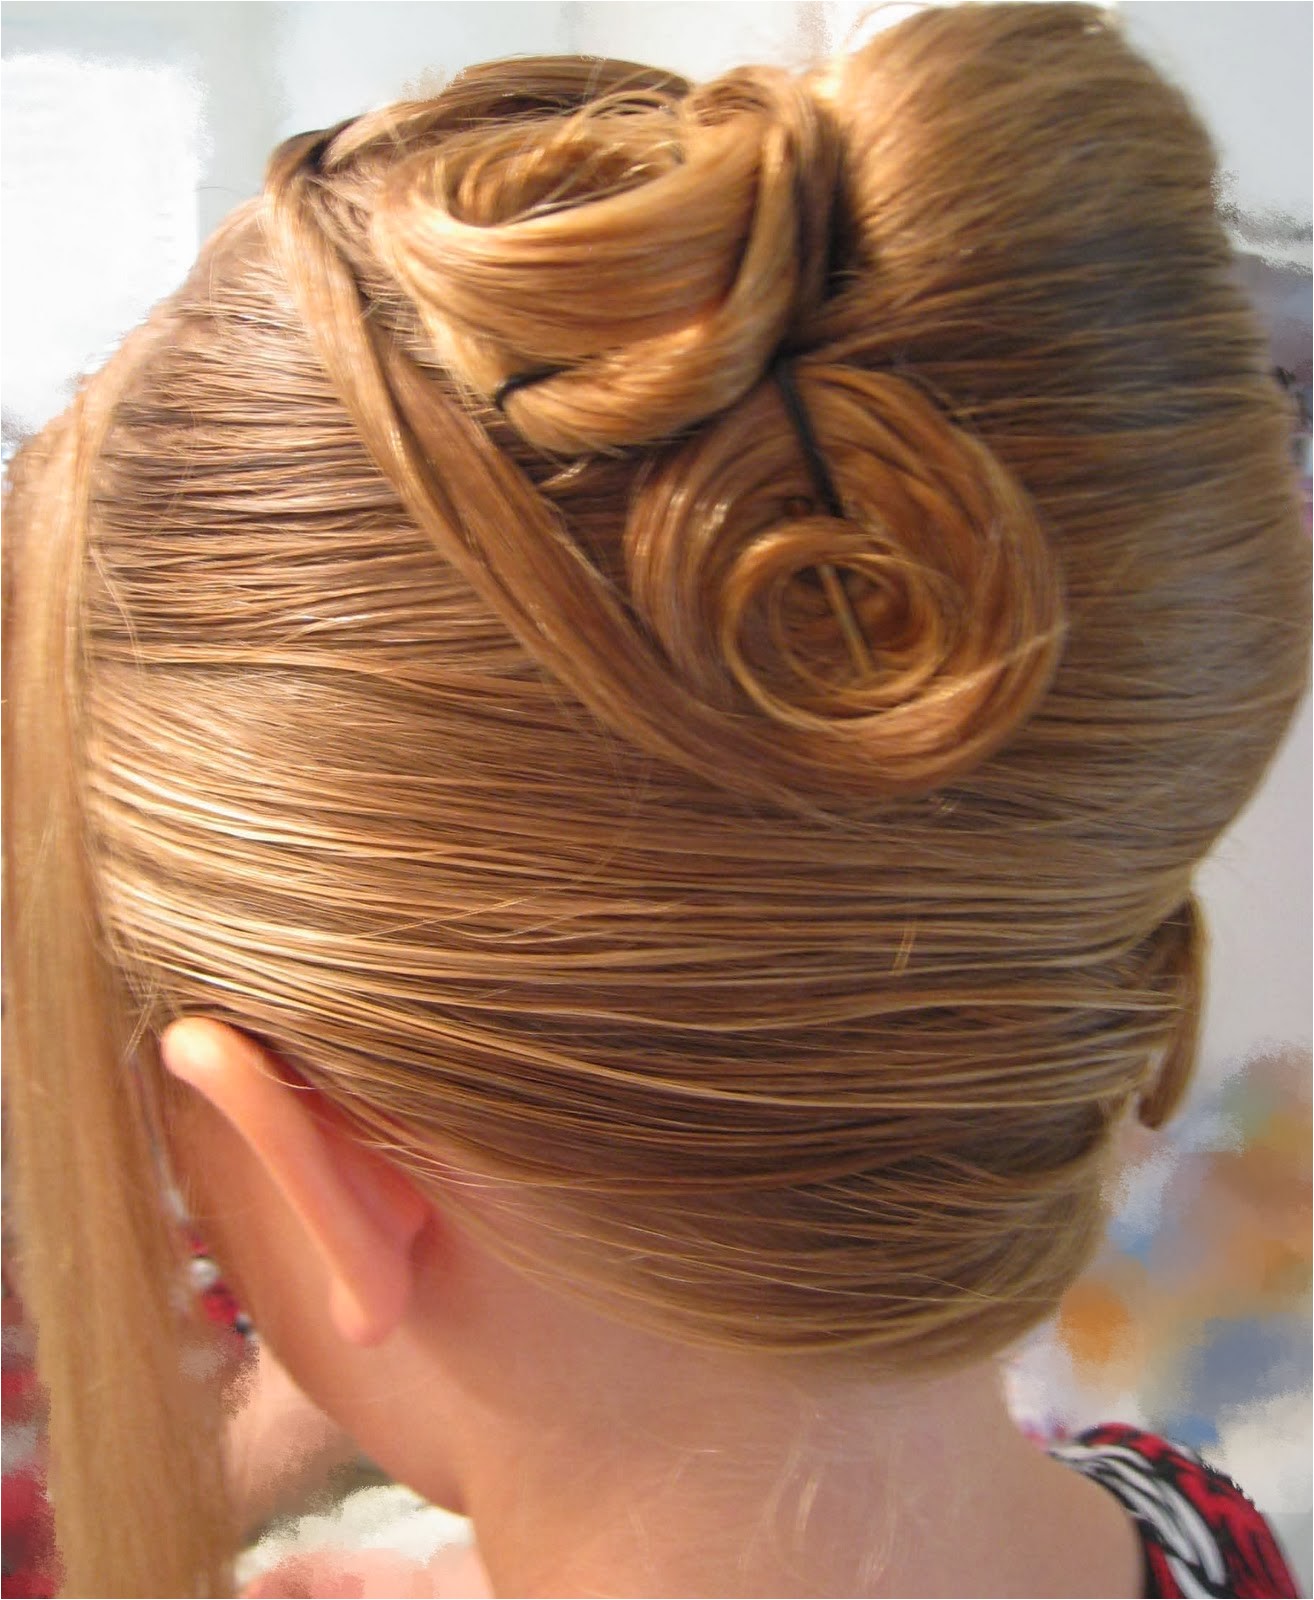 easy prom hairstyles